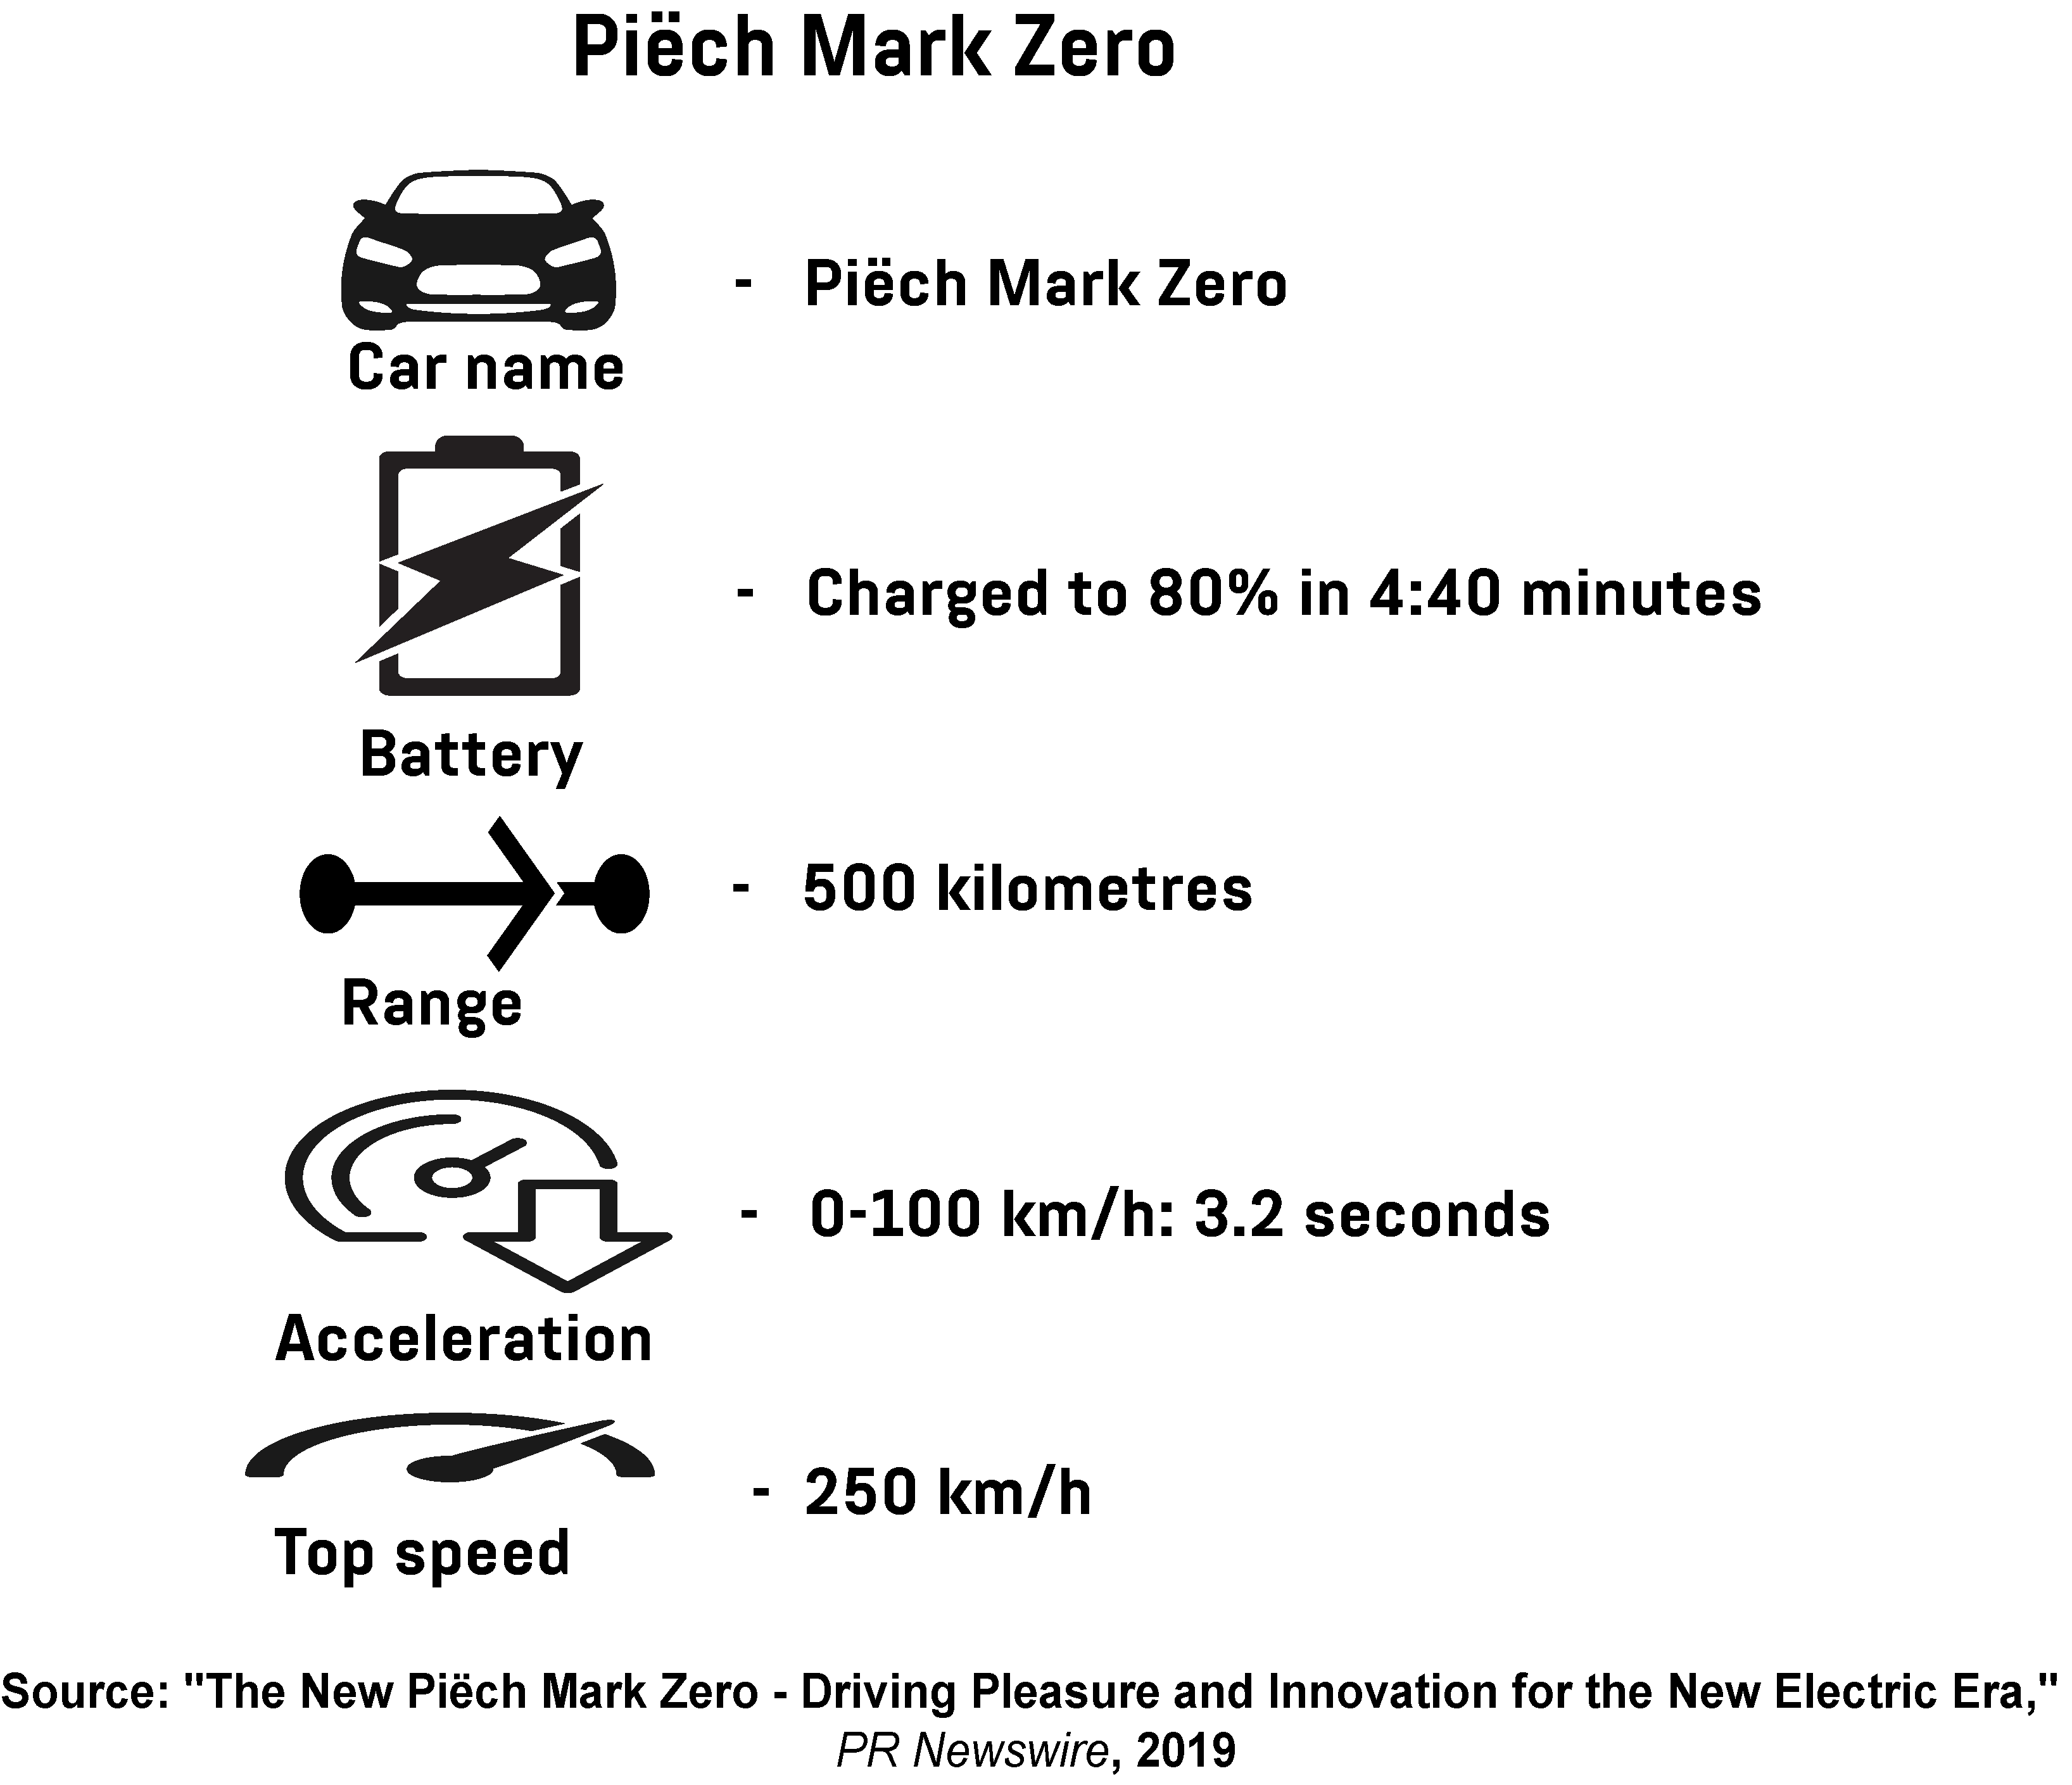 An infographic showing the performance metrics of the Piëch Mark Zero electric car